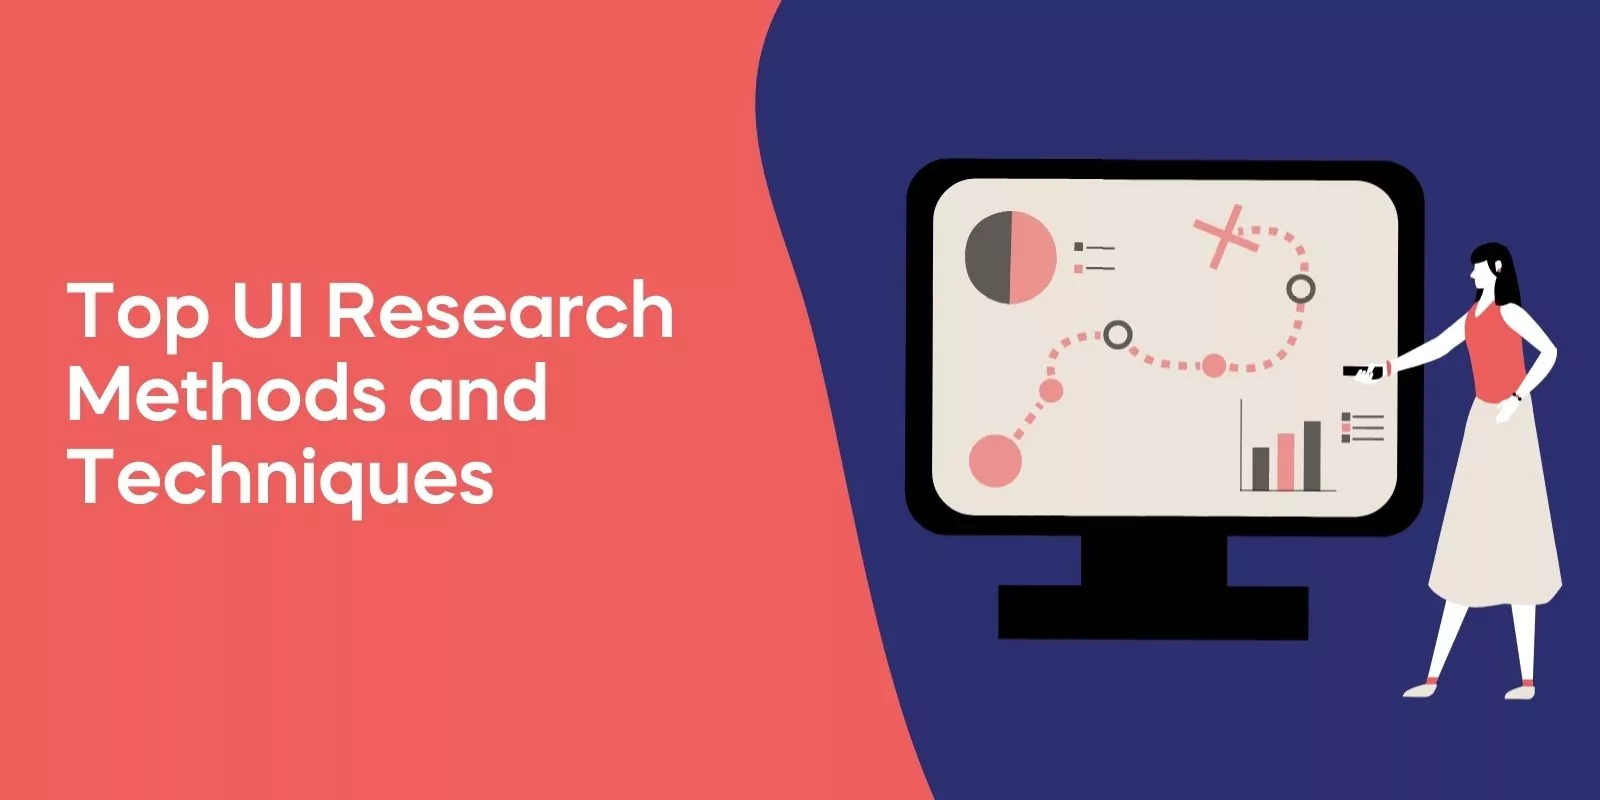 Top UI Research Methods and Techniques